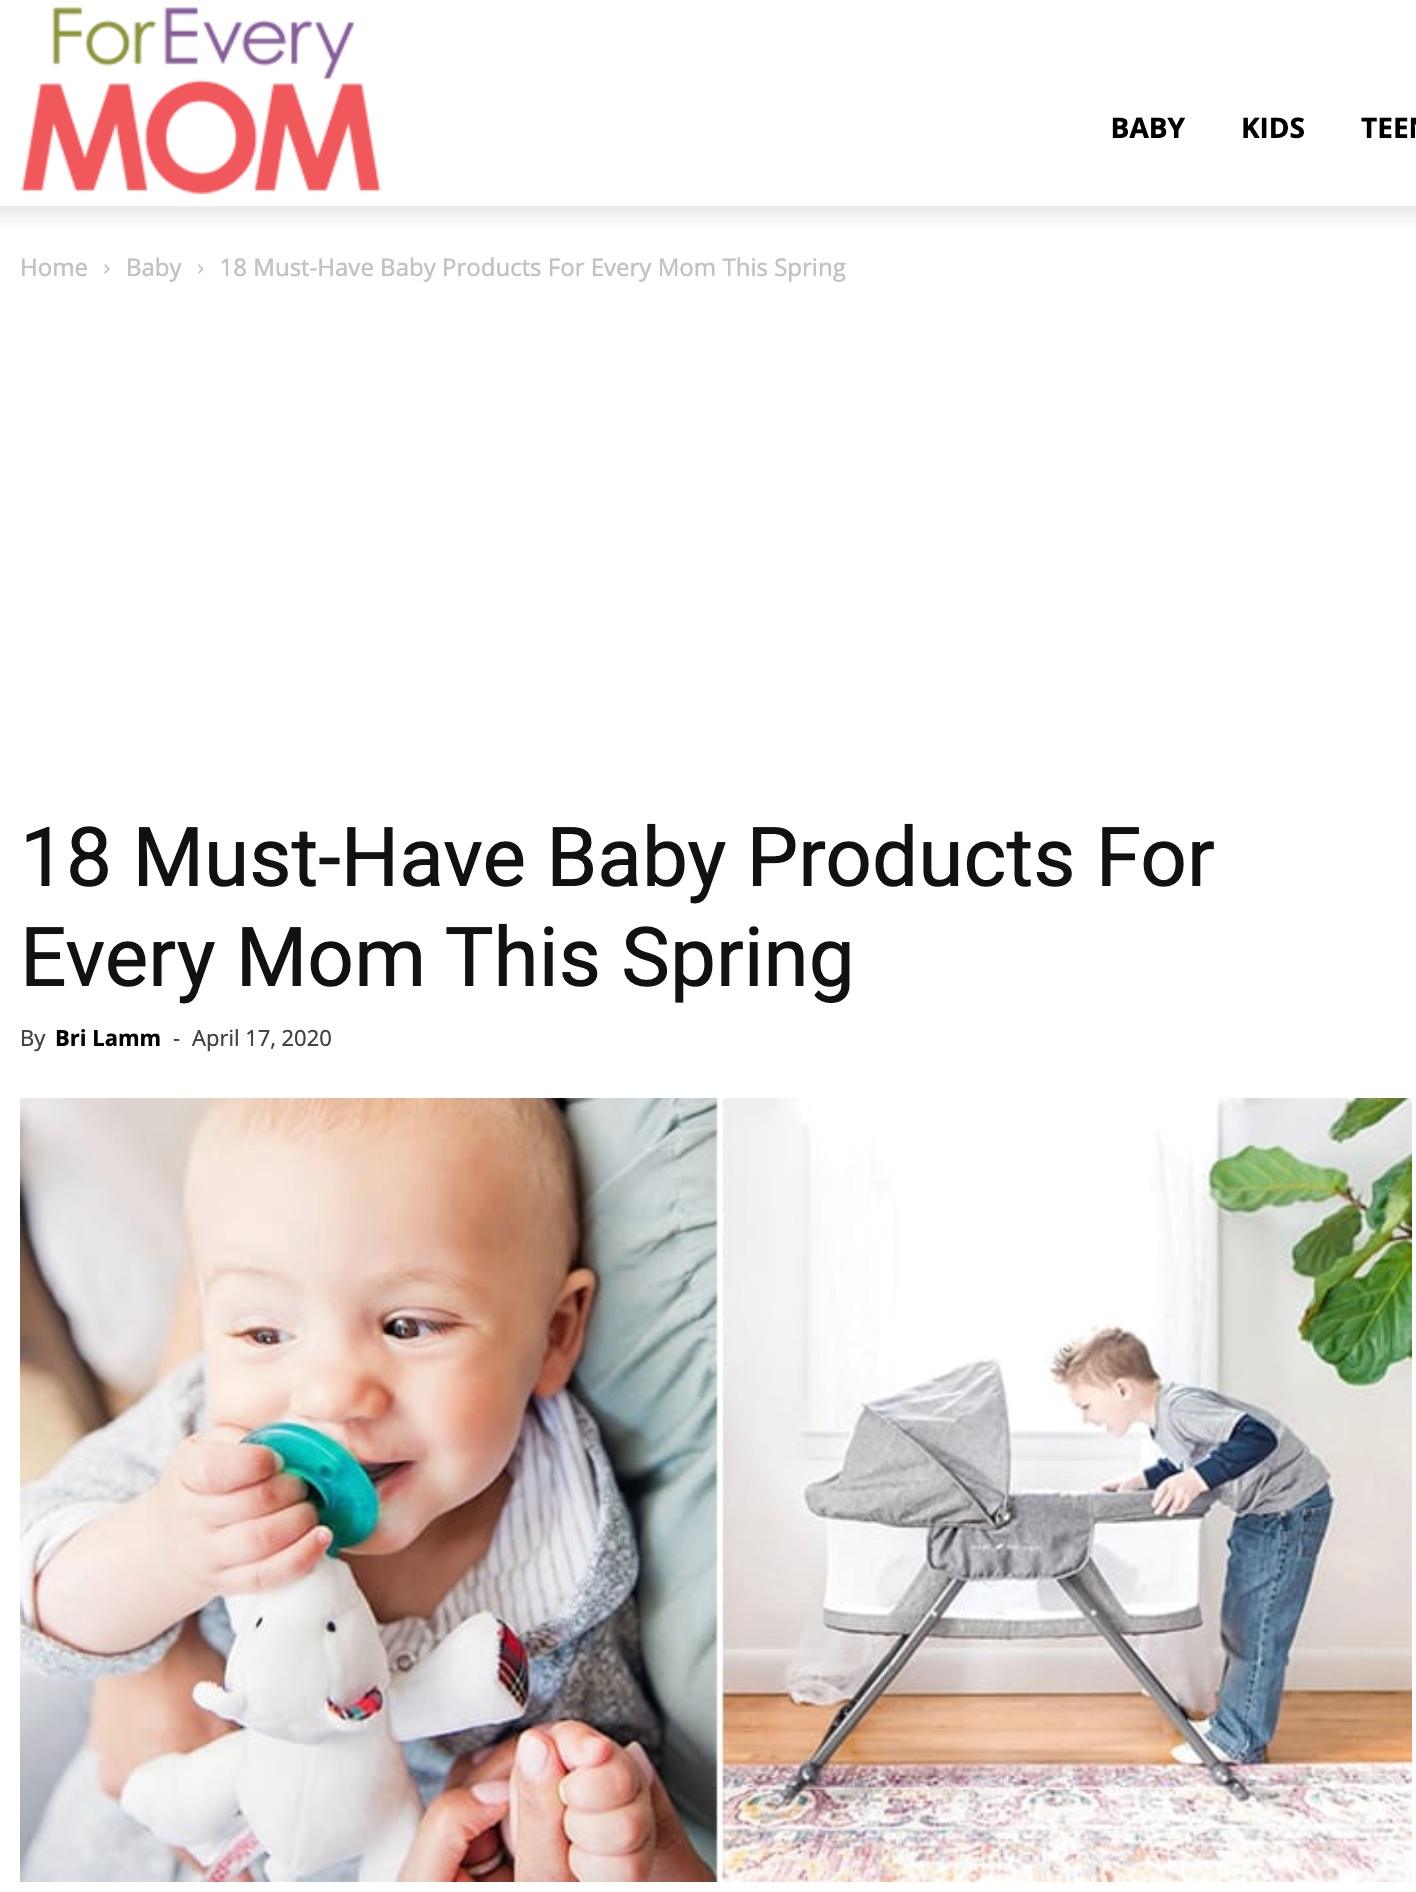 18 Must-Have Baby Products - MEMEENO Featured on foreverymom.com